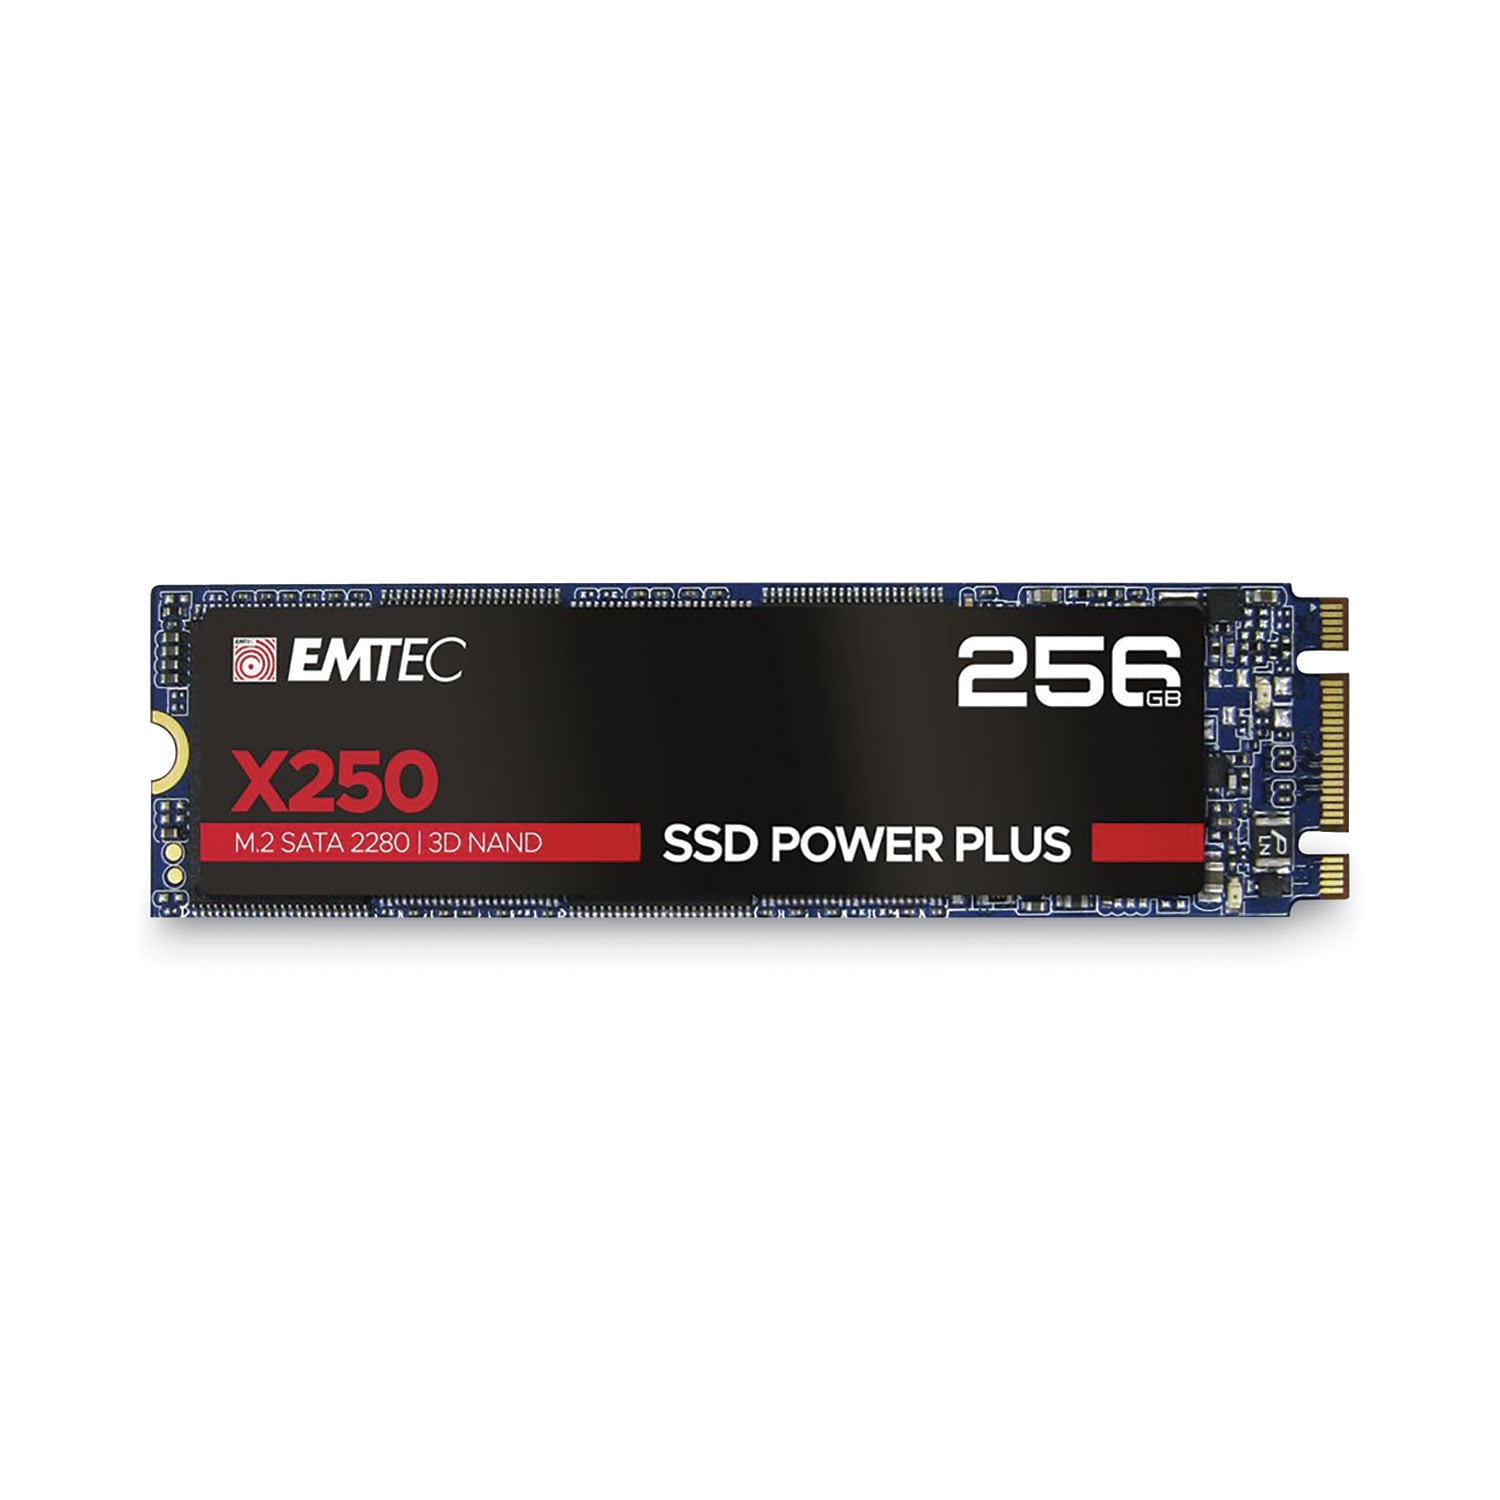 Picture of Emtec ECSSD256GX250 M2 Sata X250 256GB Solid State Drive